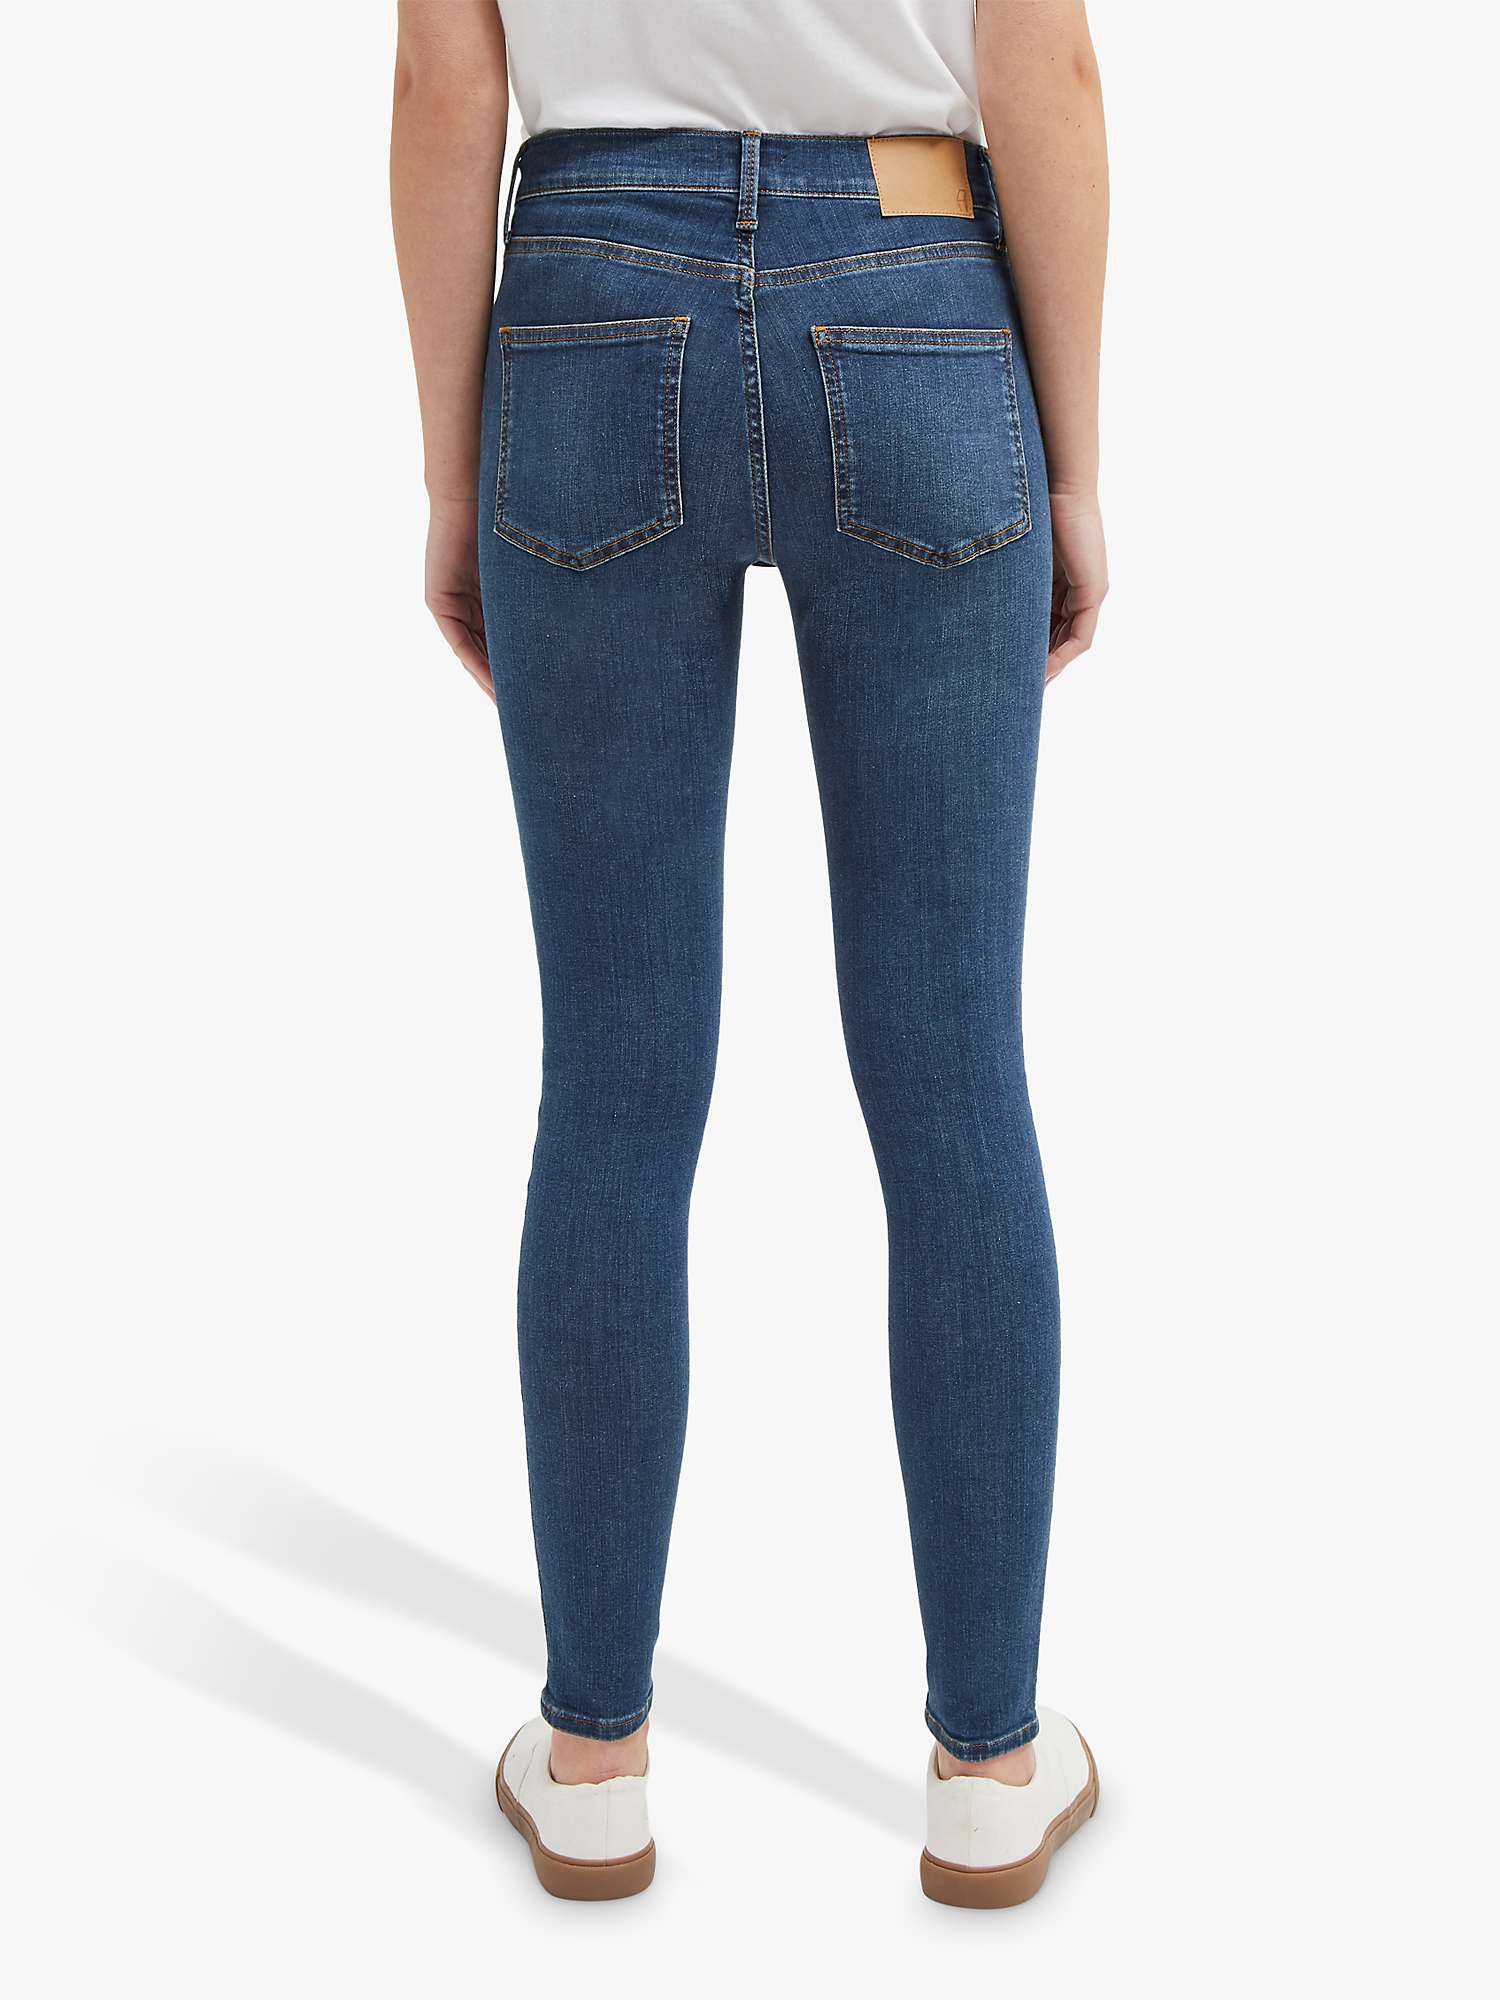 Buy French Connection Skinny Jeans Online at johnlewis.com